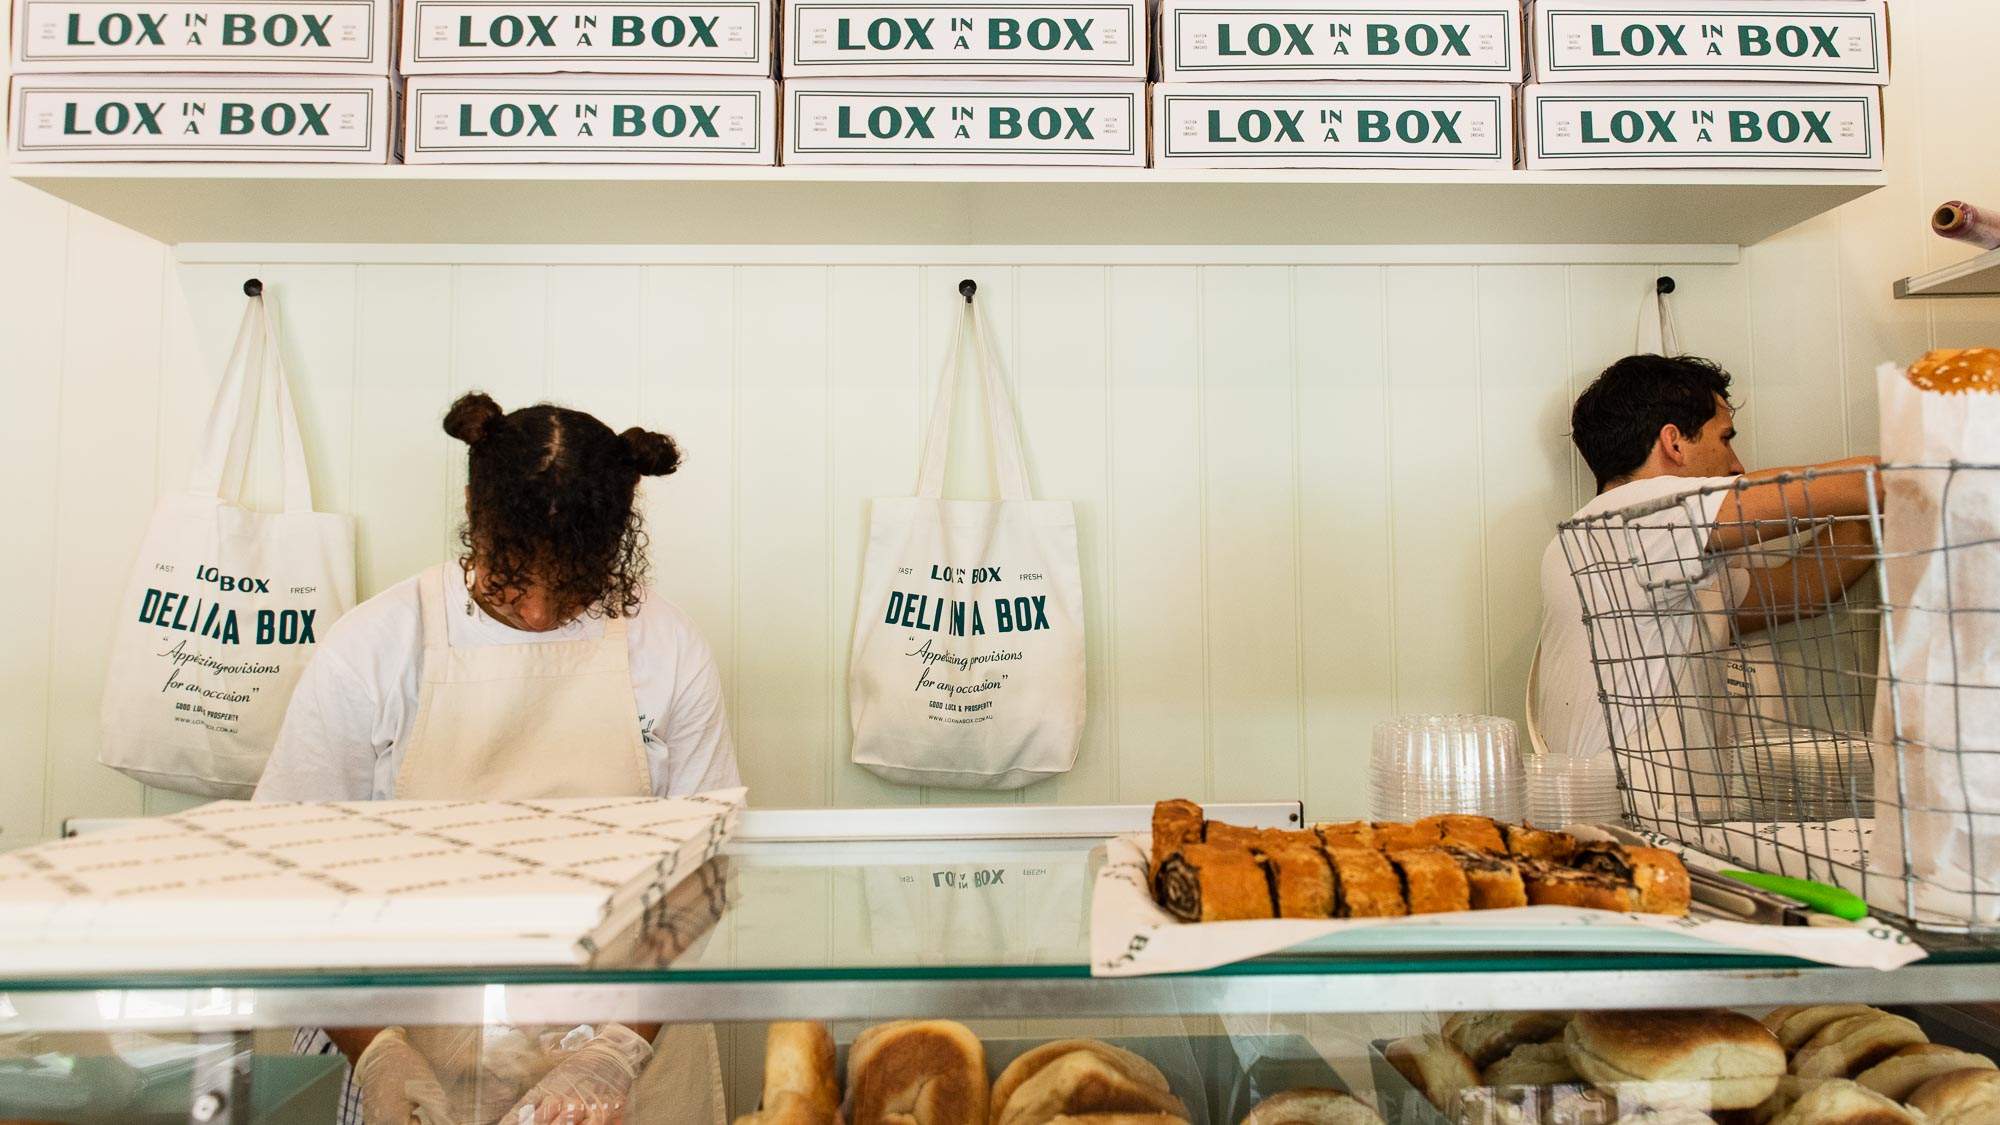 Lox in a Box Is Bondi's Jewish Deli Delivering Some of Sydney's Best Bagels to Your Doorstep